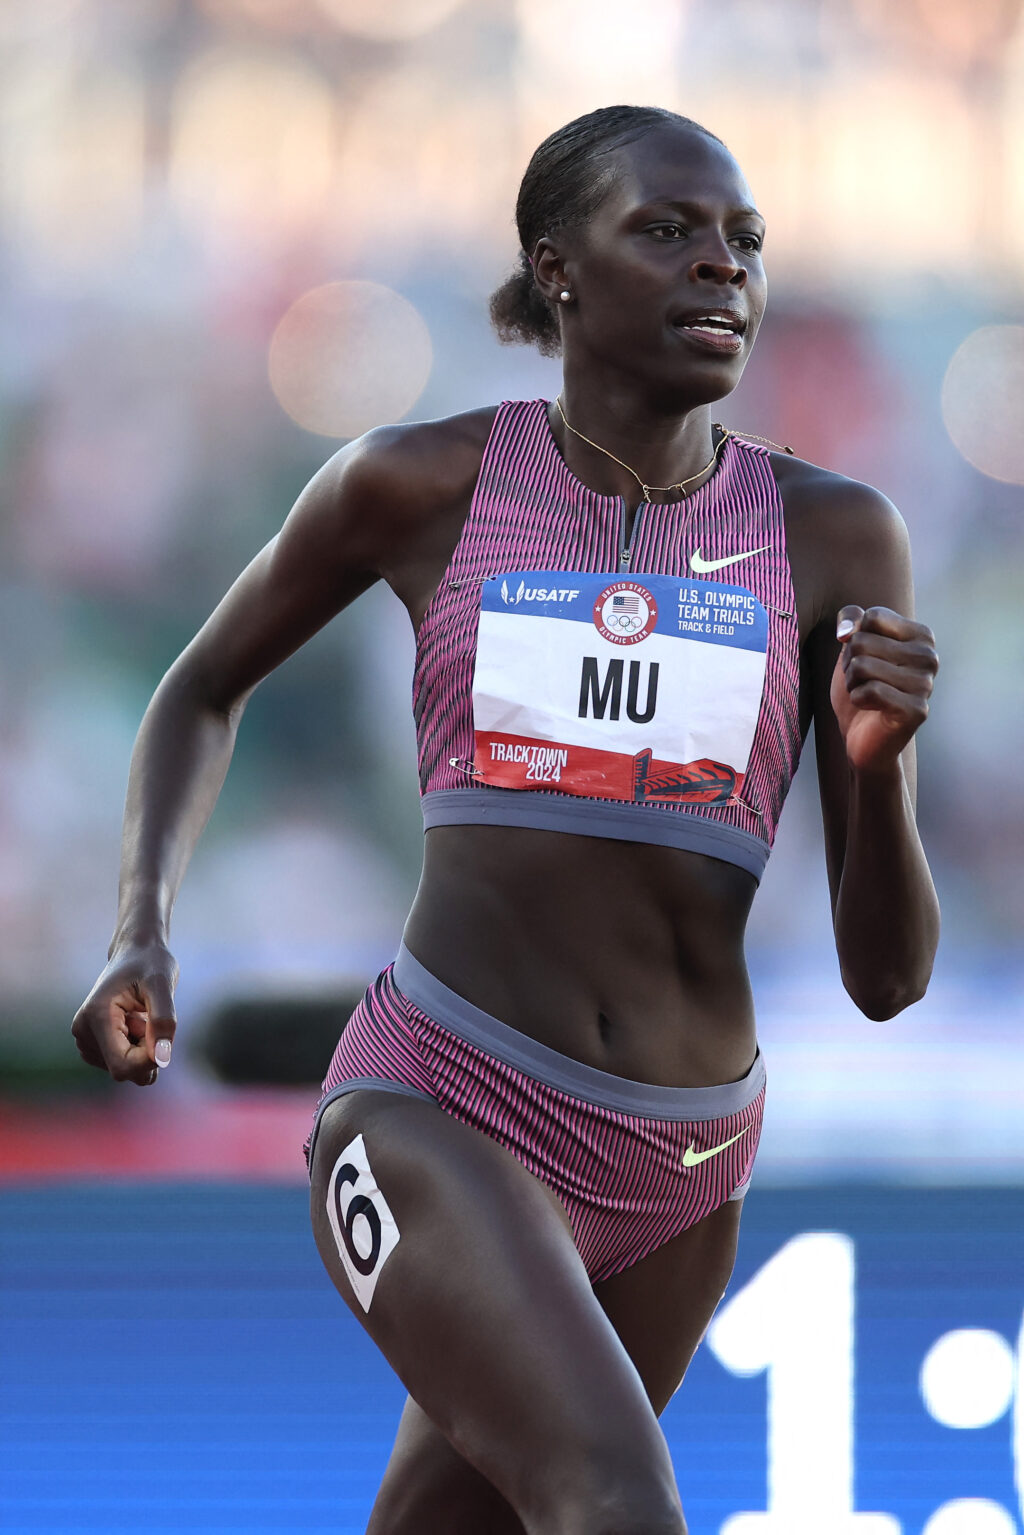 Olympic 800m champion Mu in tears as fall ends Paris dream. Athing Mu competes in the women's 800 meter final on Day Four of the 2024 U.S. Olympic Team Track & Field Trials at Hayward Field on June 24, 2024 in Eugene, Oregon.  | Getty Images via AFP